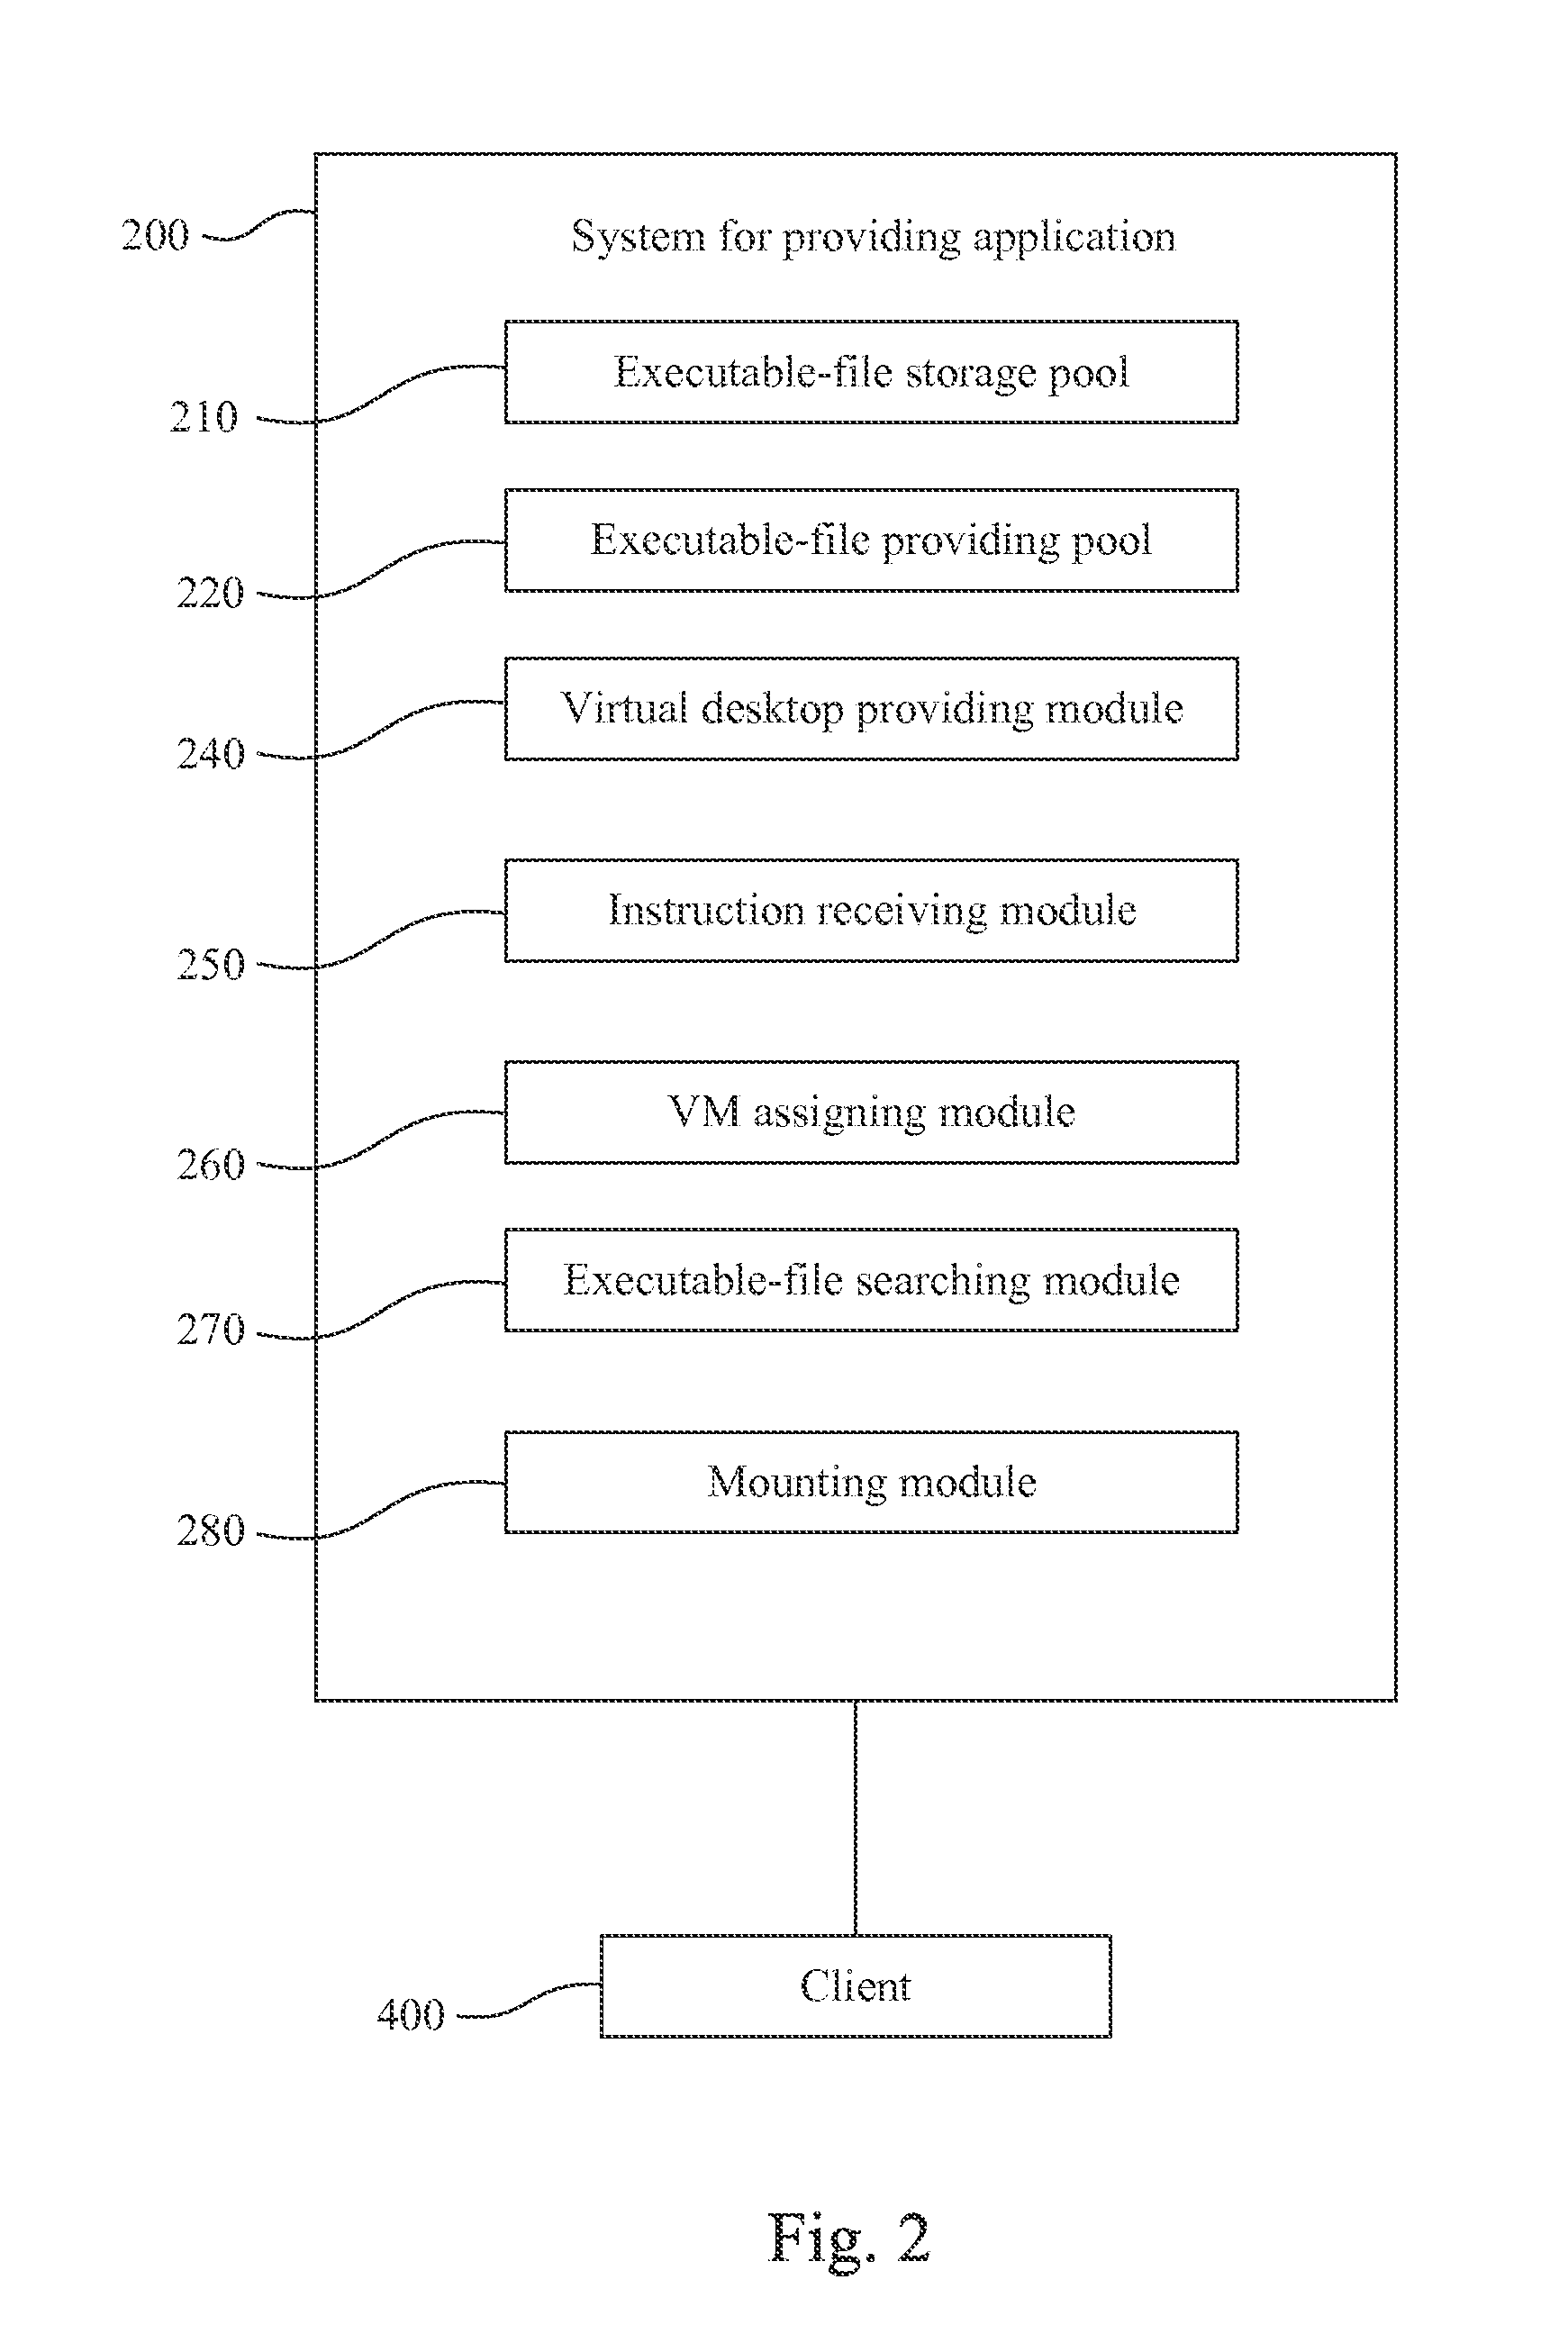 Method and System for Providing Application by Virtual Machine and Computer-Readable Storage Medium to Execute the Method